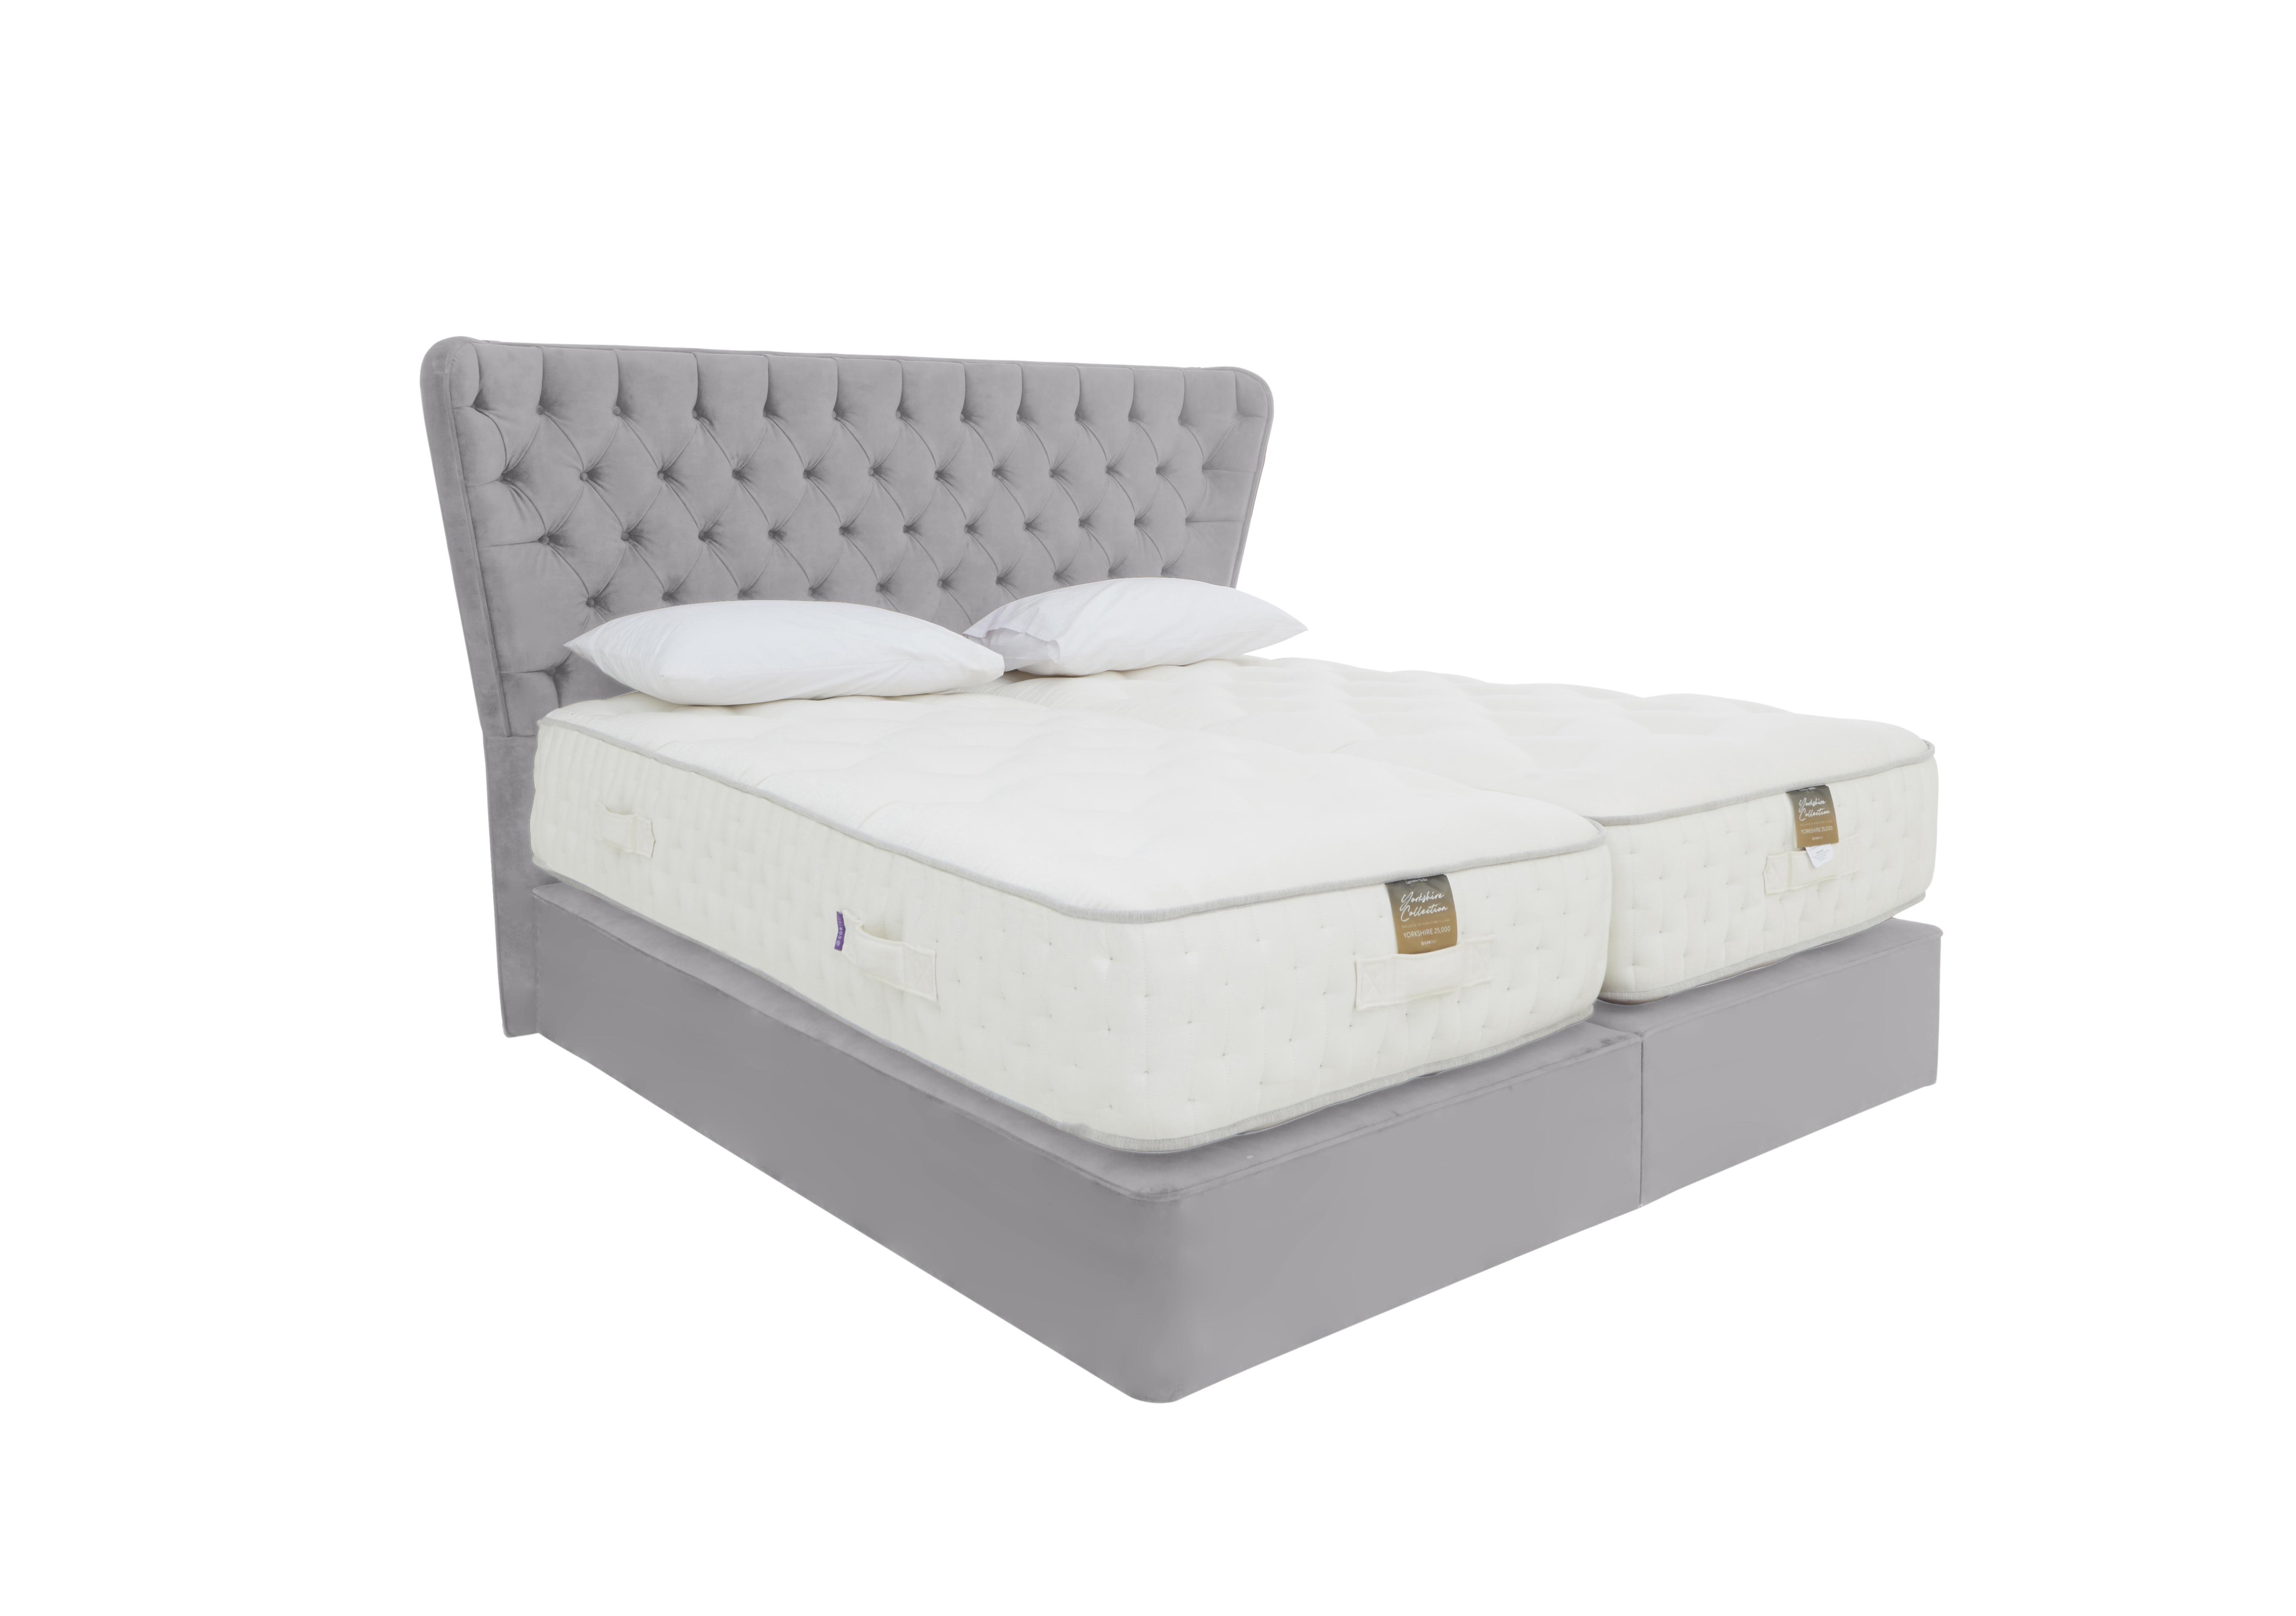 Yorkshire 25K Divan Set with Zip and Link Mattress in Seven Lilac on Furniture Village